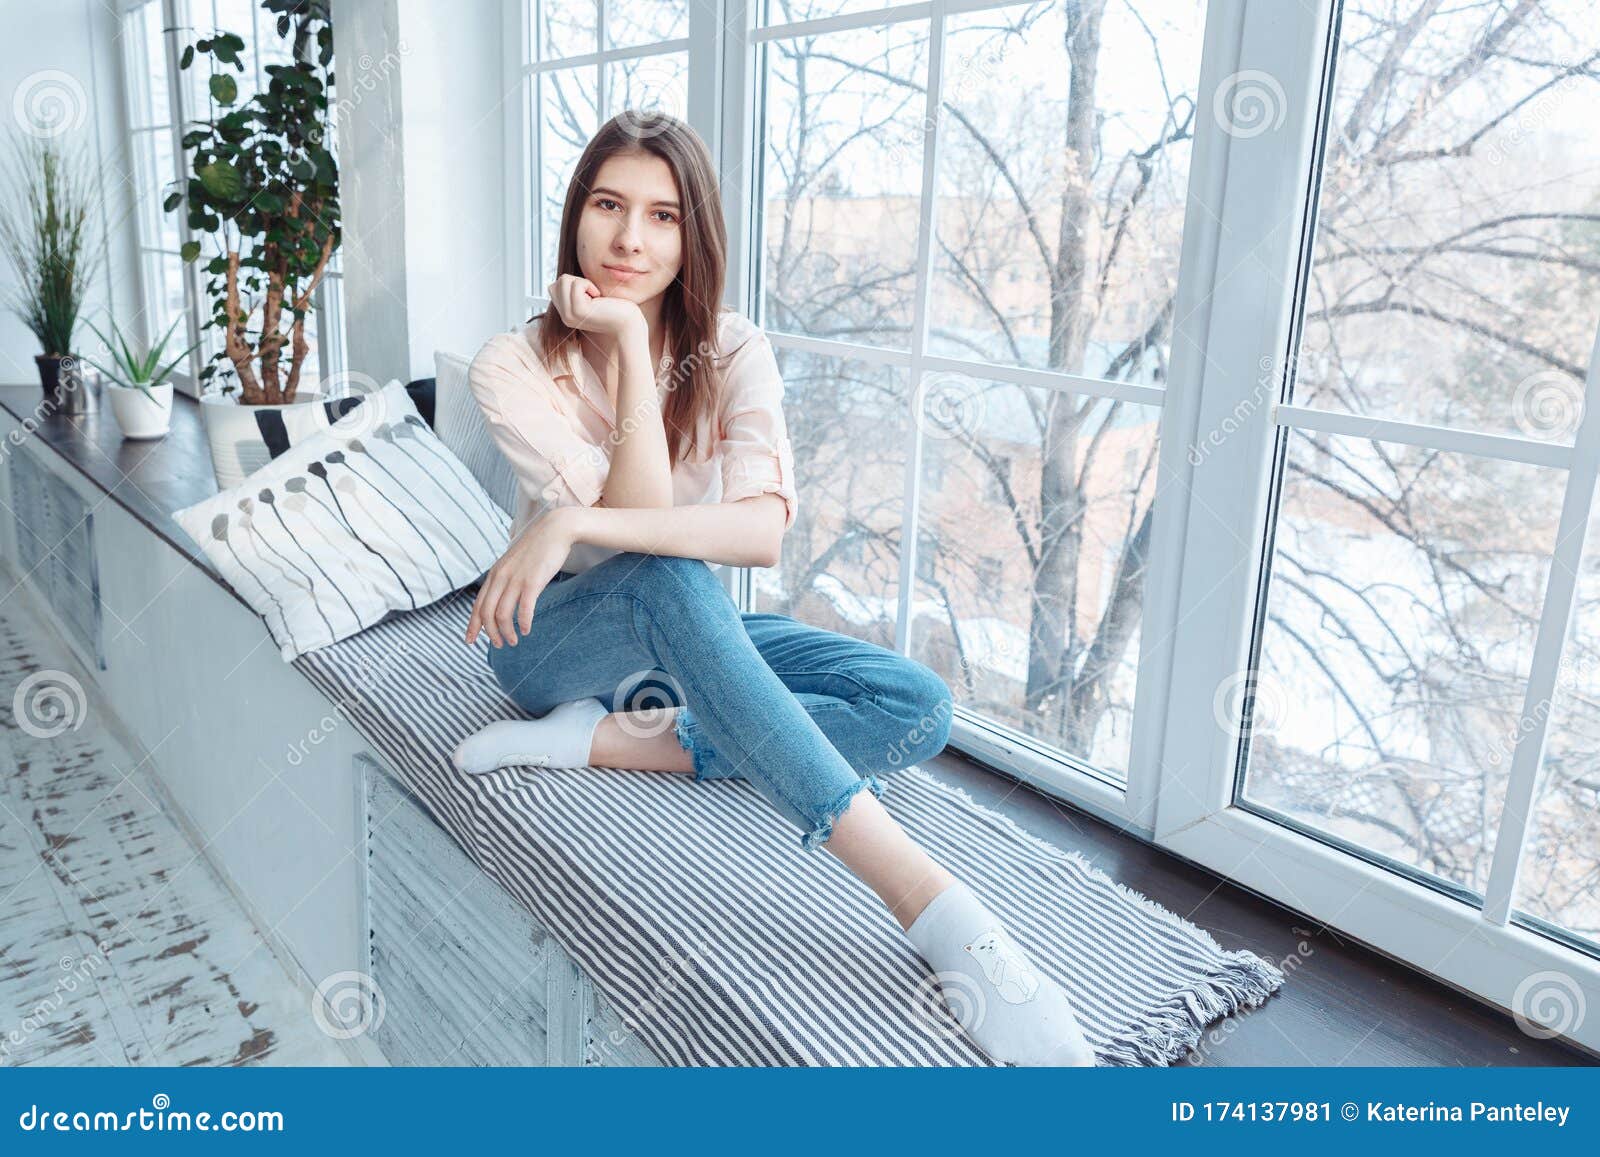 Openly Ours recipe A Girl in a Pink Jacket, Blue Jeans and White Socks is Sitting on a Wide  Windowsill Stock Image - Image of colours, confidence: 174137981